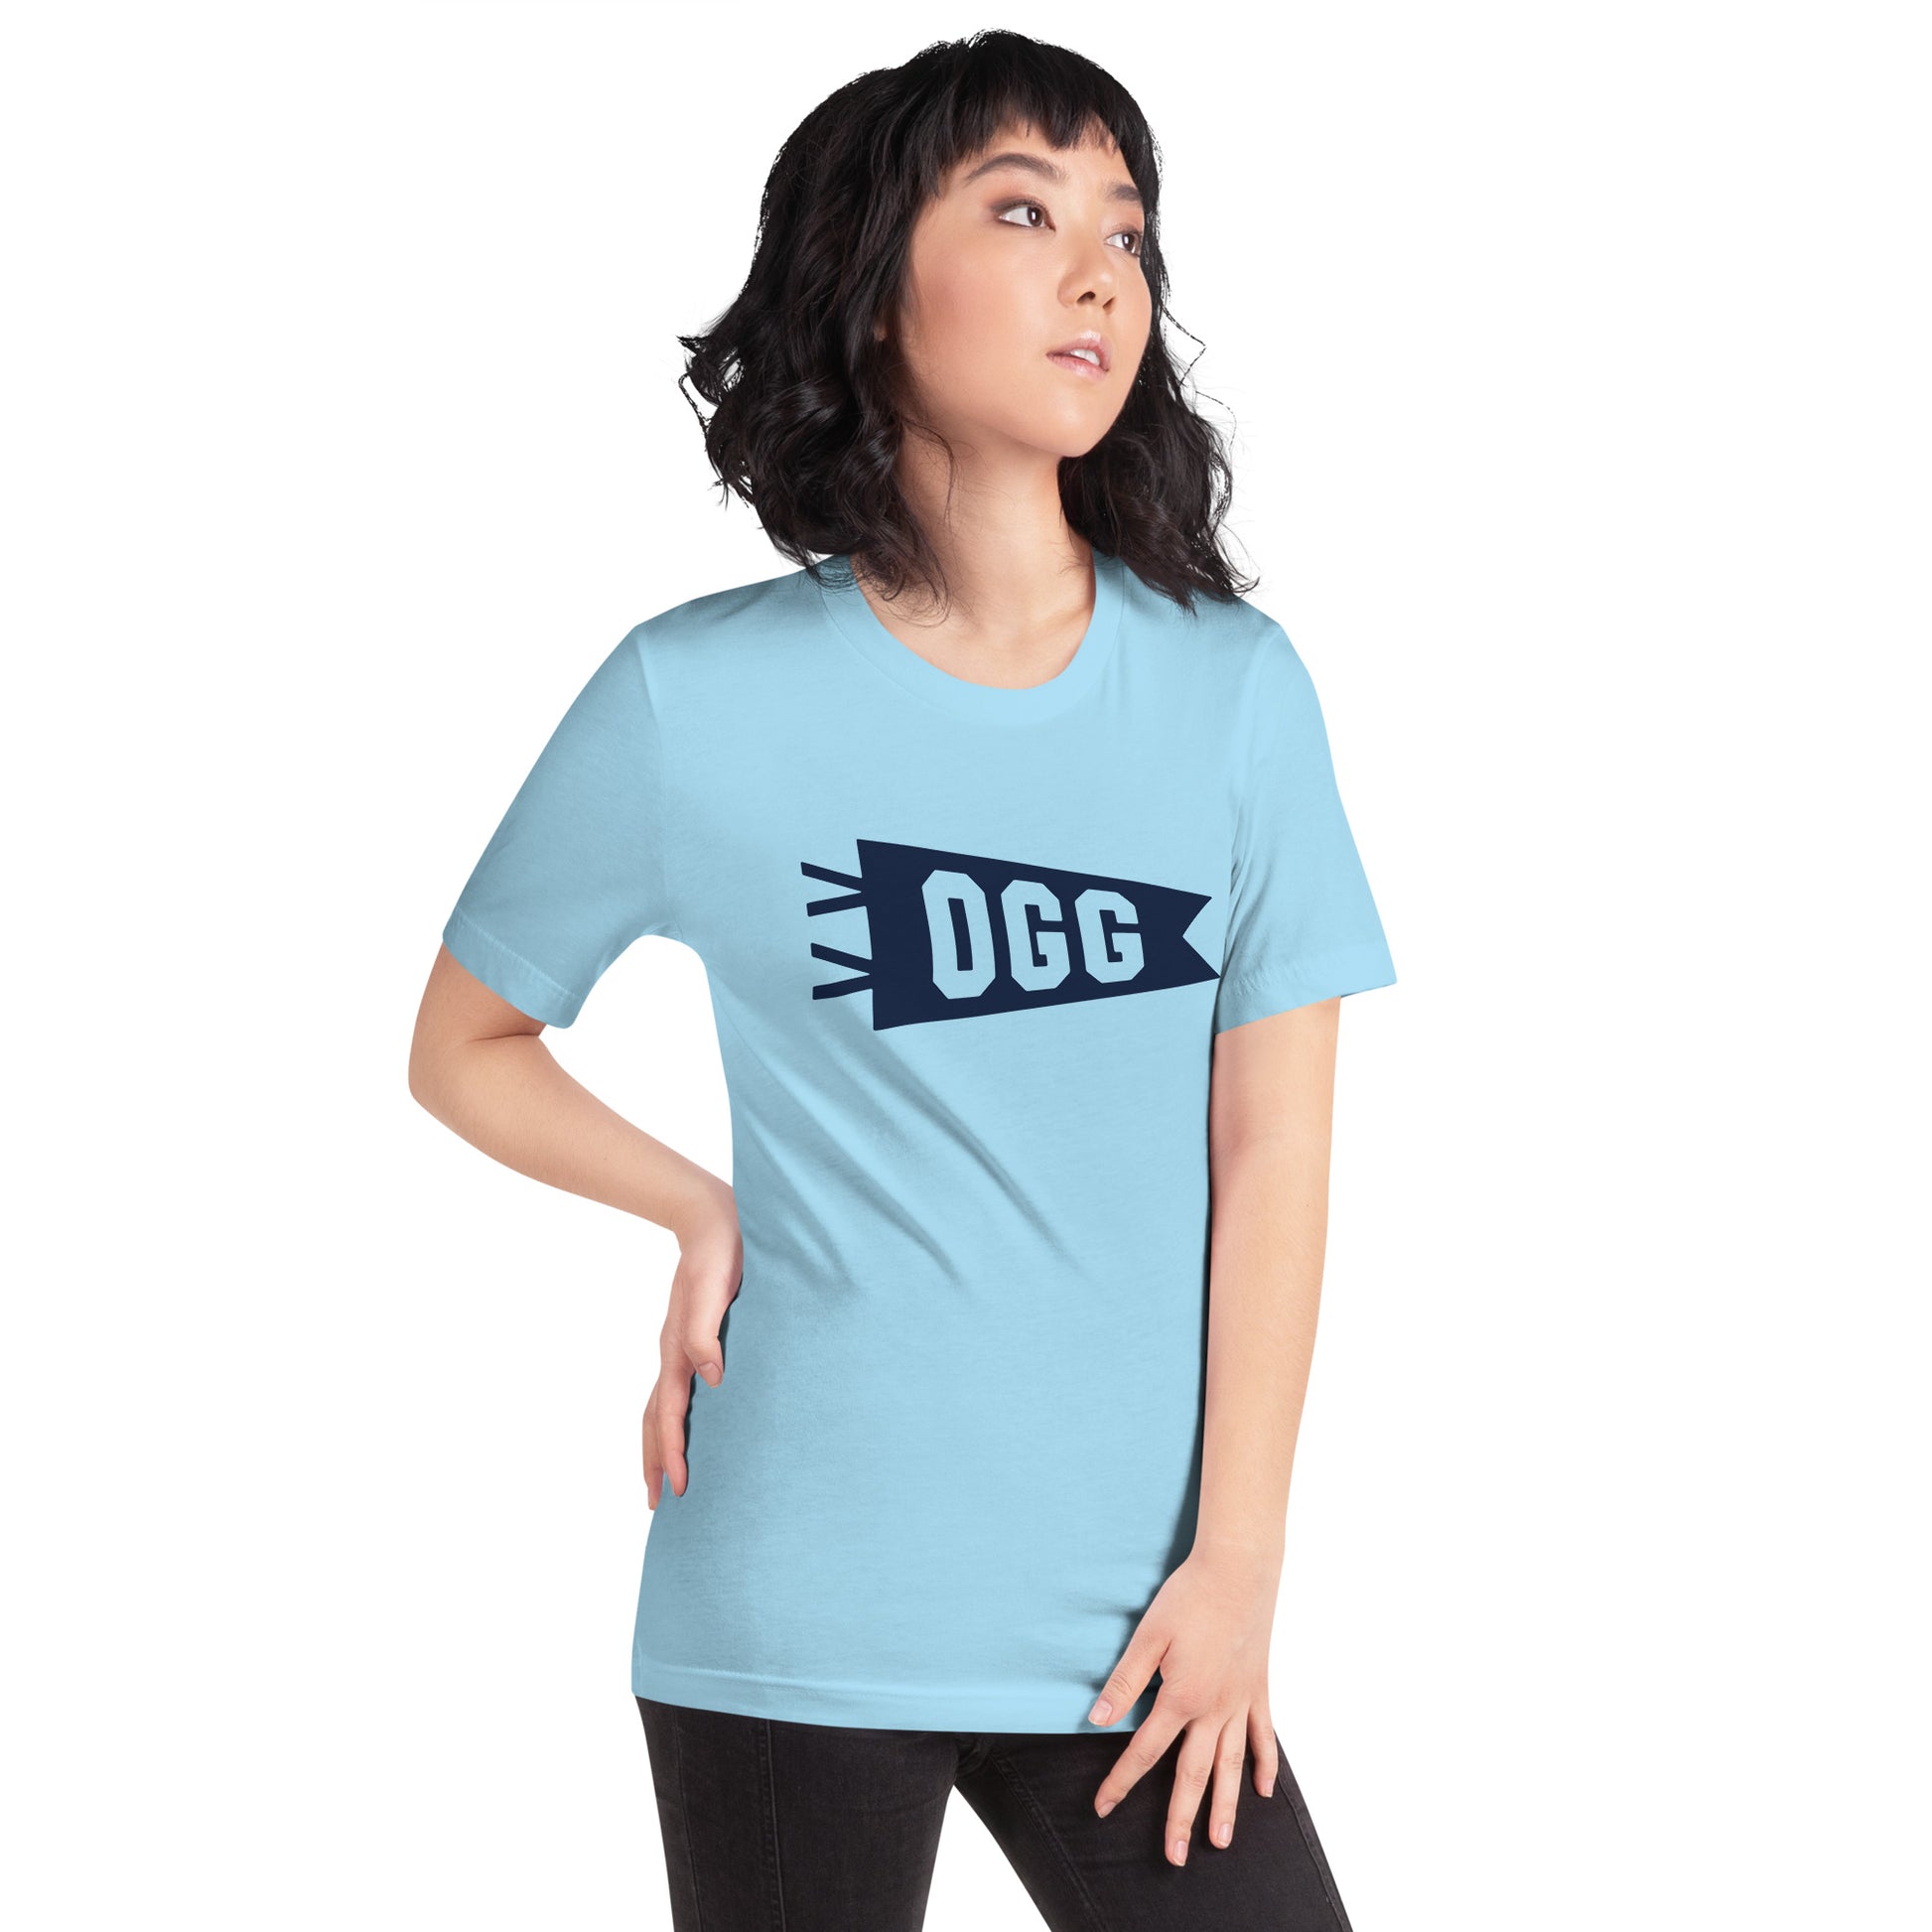 Airport Code T-Shirt - Navy Blue Graphic • OGG Maui • YHM Designs - Image 07